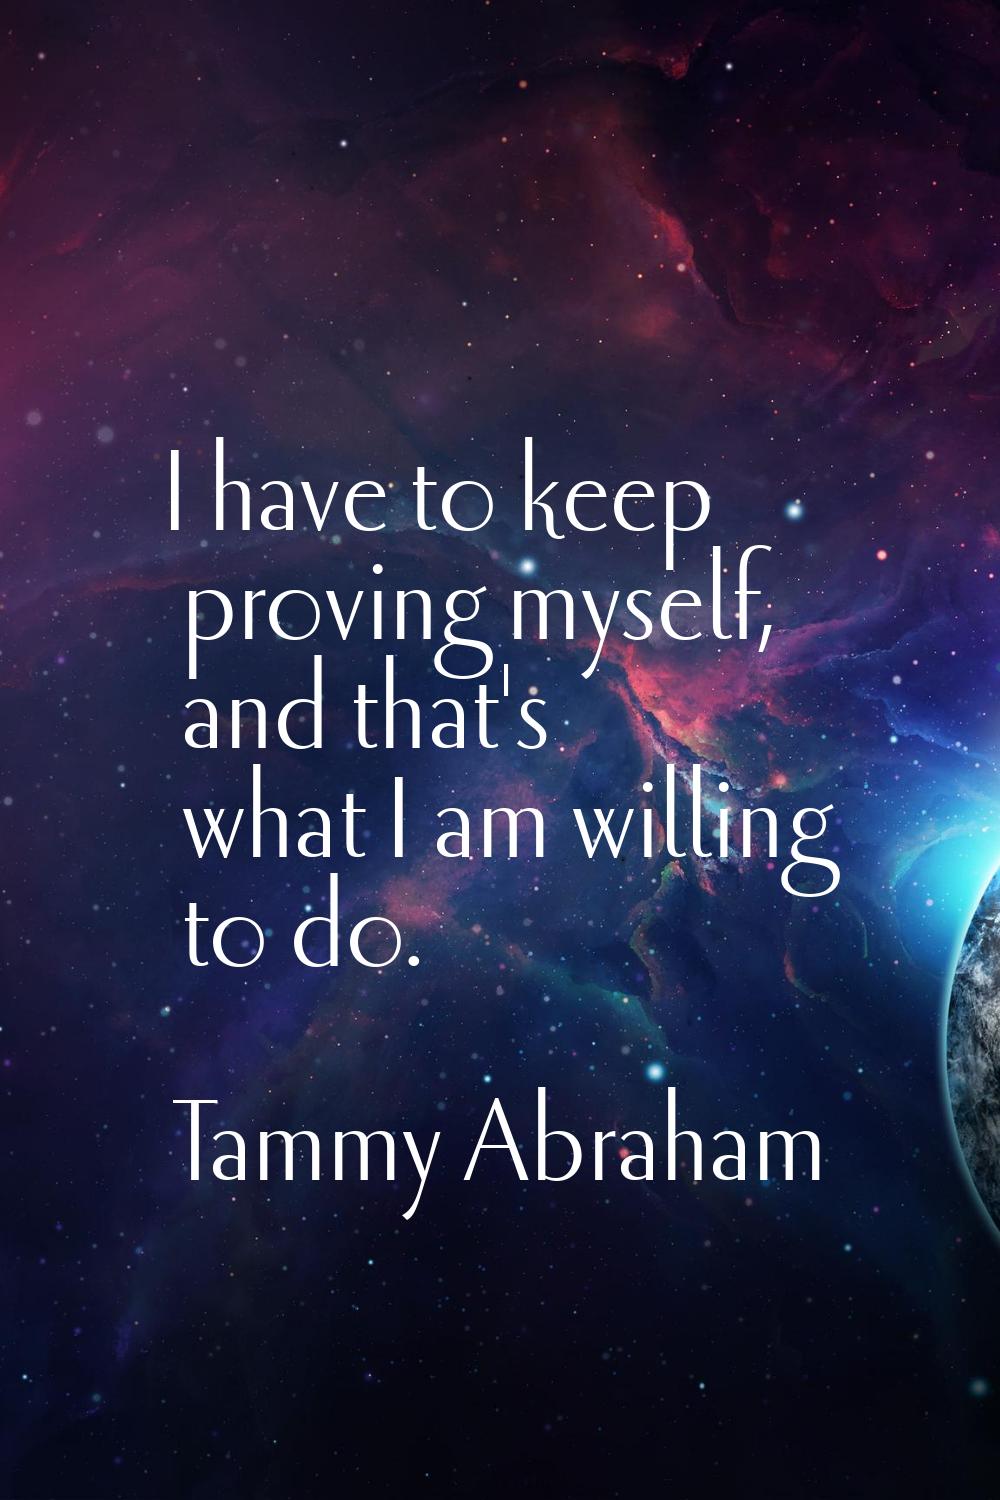 I have to keep proving myself, and that's what I am willing to do.